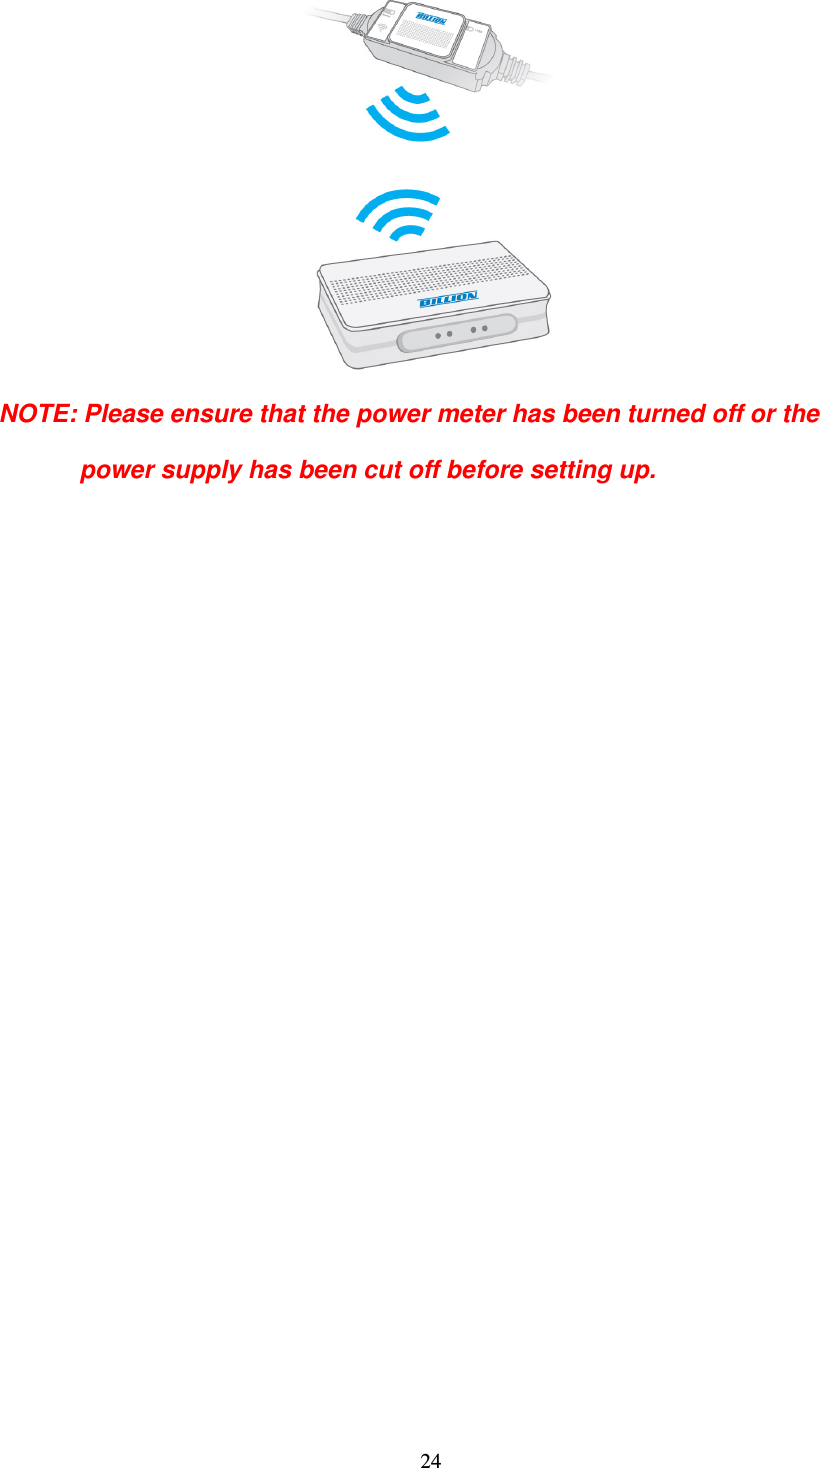   24 NOTE: Please ensure that the power meter has been turned off or the                   power supply has been cut off before setting up.                           